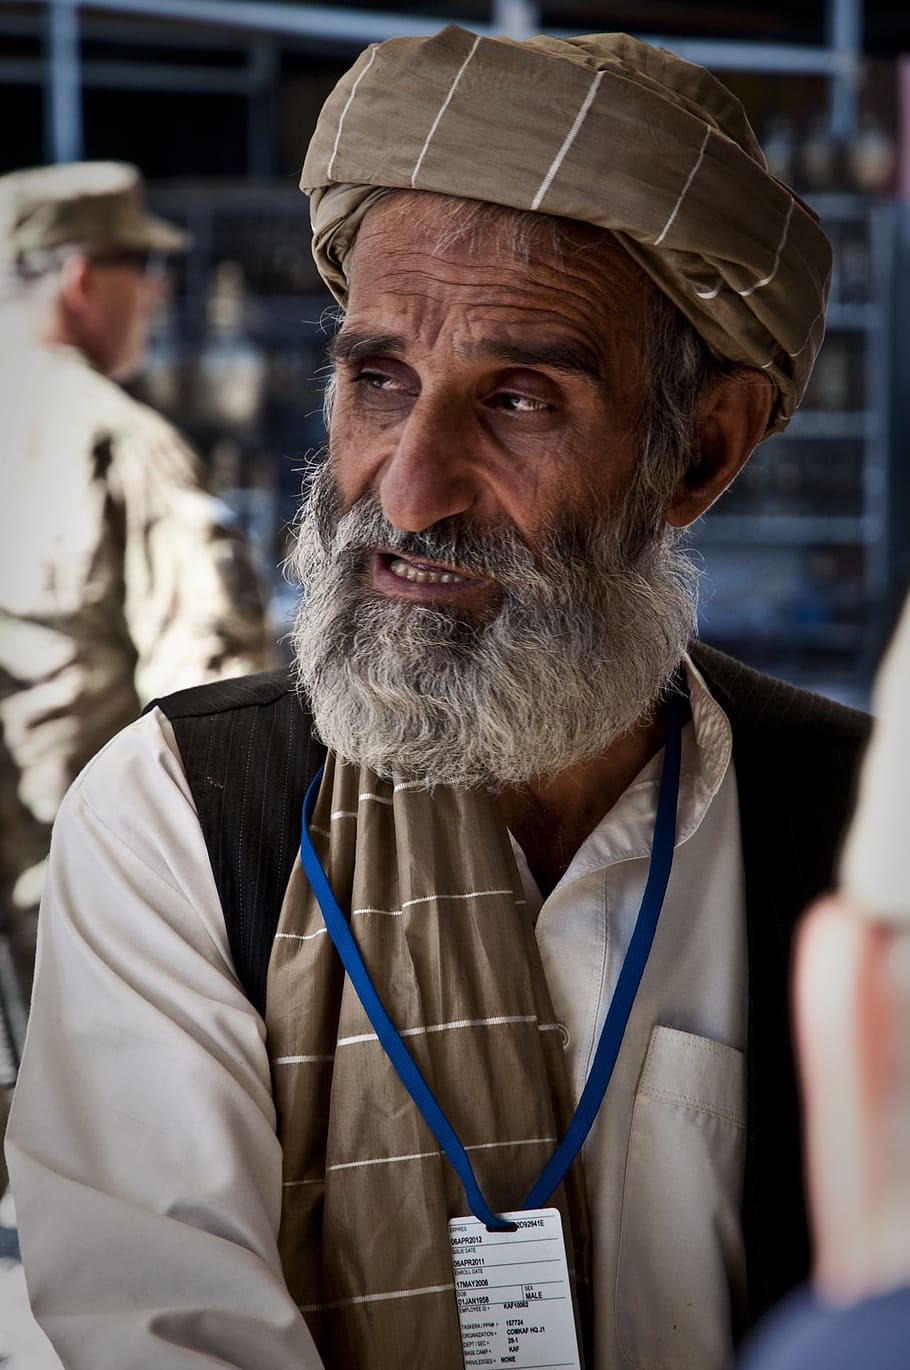 old man, beard, aging, afghanistan, facial hair, clothing, portrait, one person, senior adult, adult